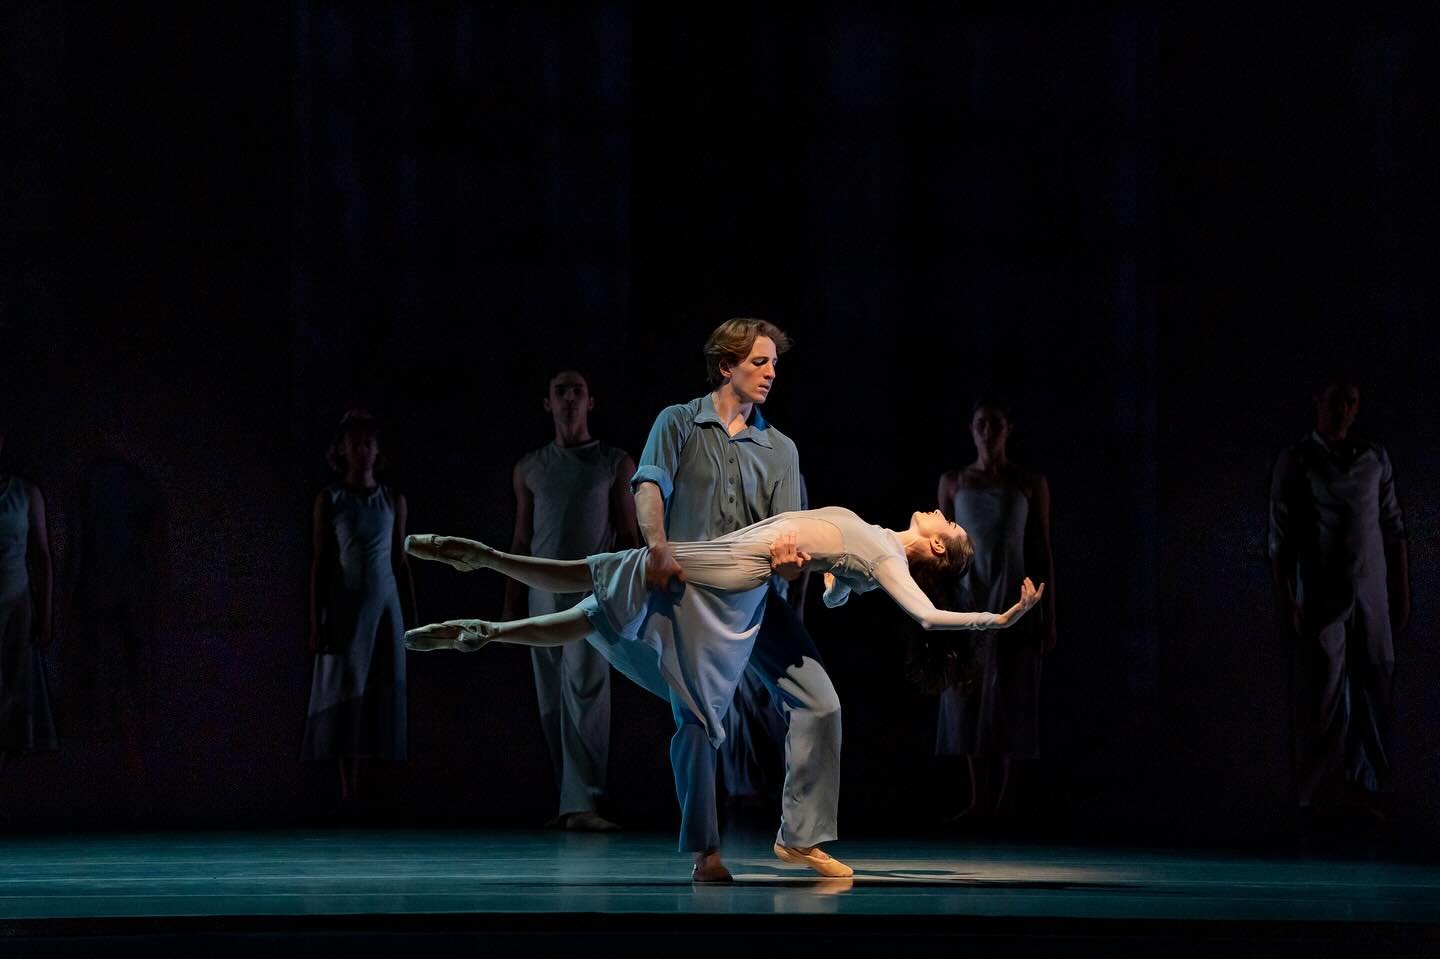 &bull;Hungry Ghosts&bull; 
Double show day in Chicago

@lucia.connolly 💙 
@stefangoncalvez 🩵 

@joffreyballet 
@lyricopera

Photography @cherylmannphoto 
@jeremy_birchall_music